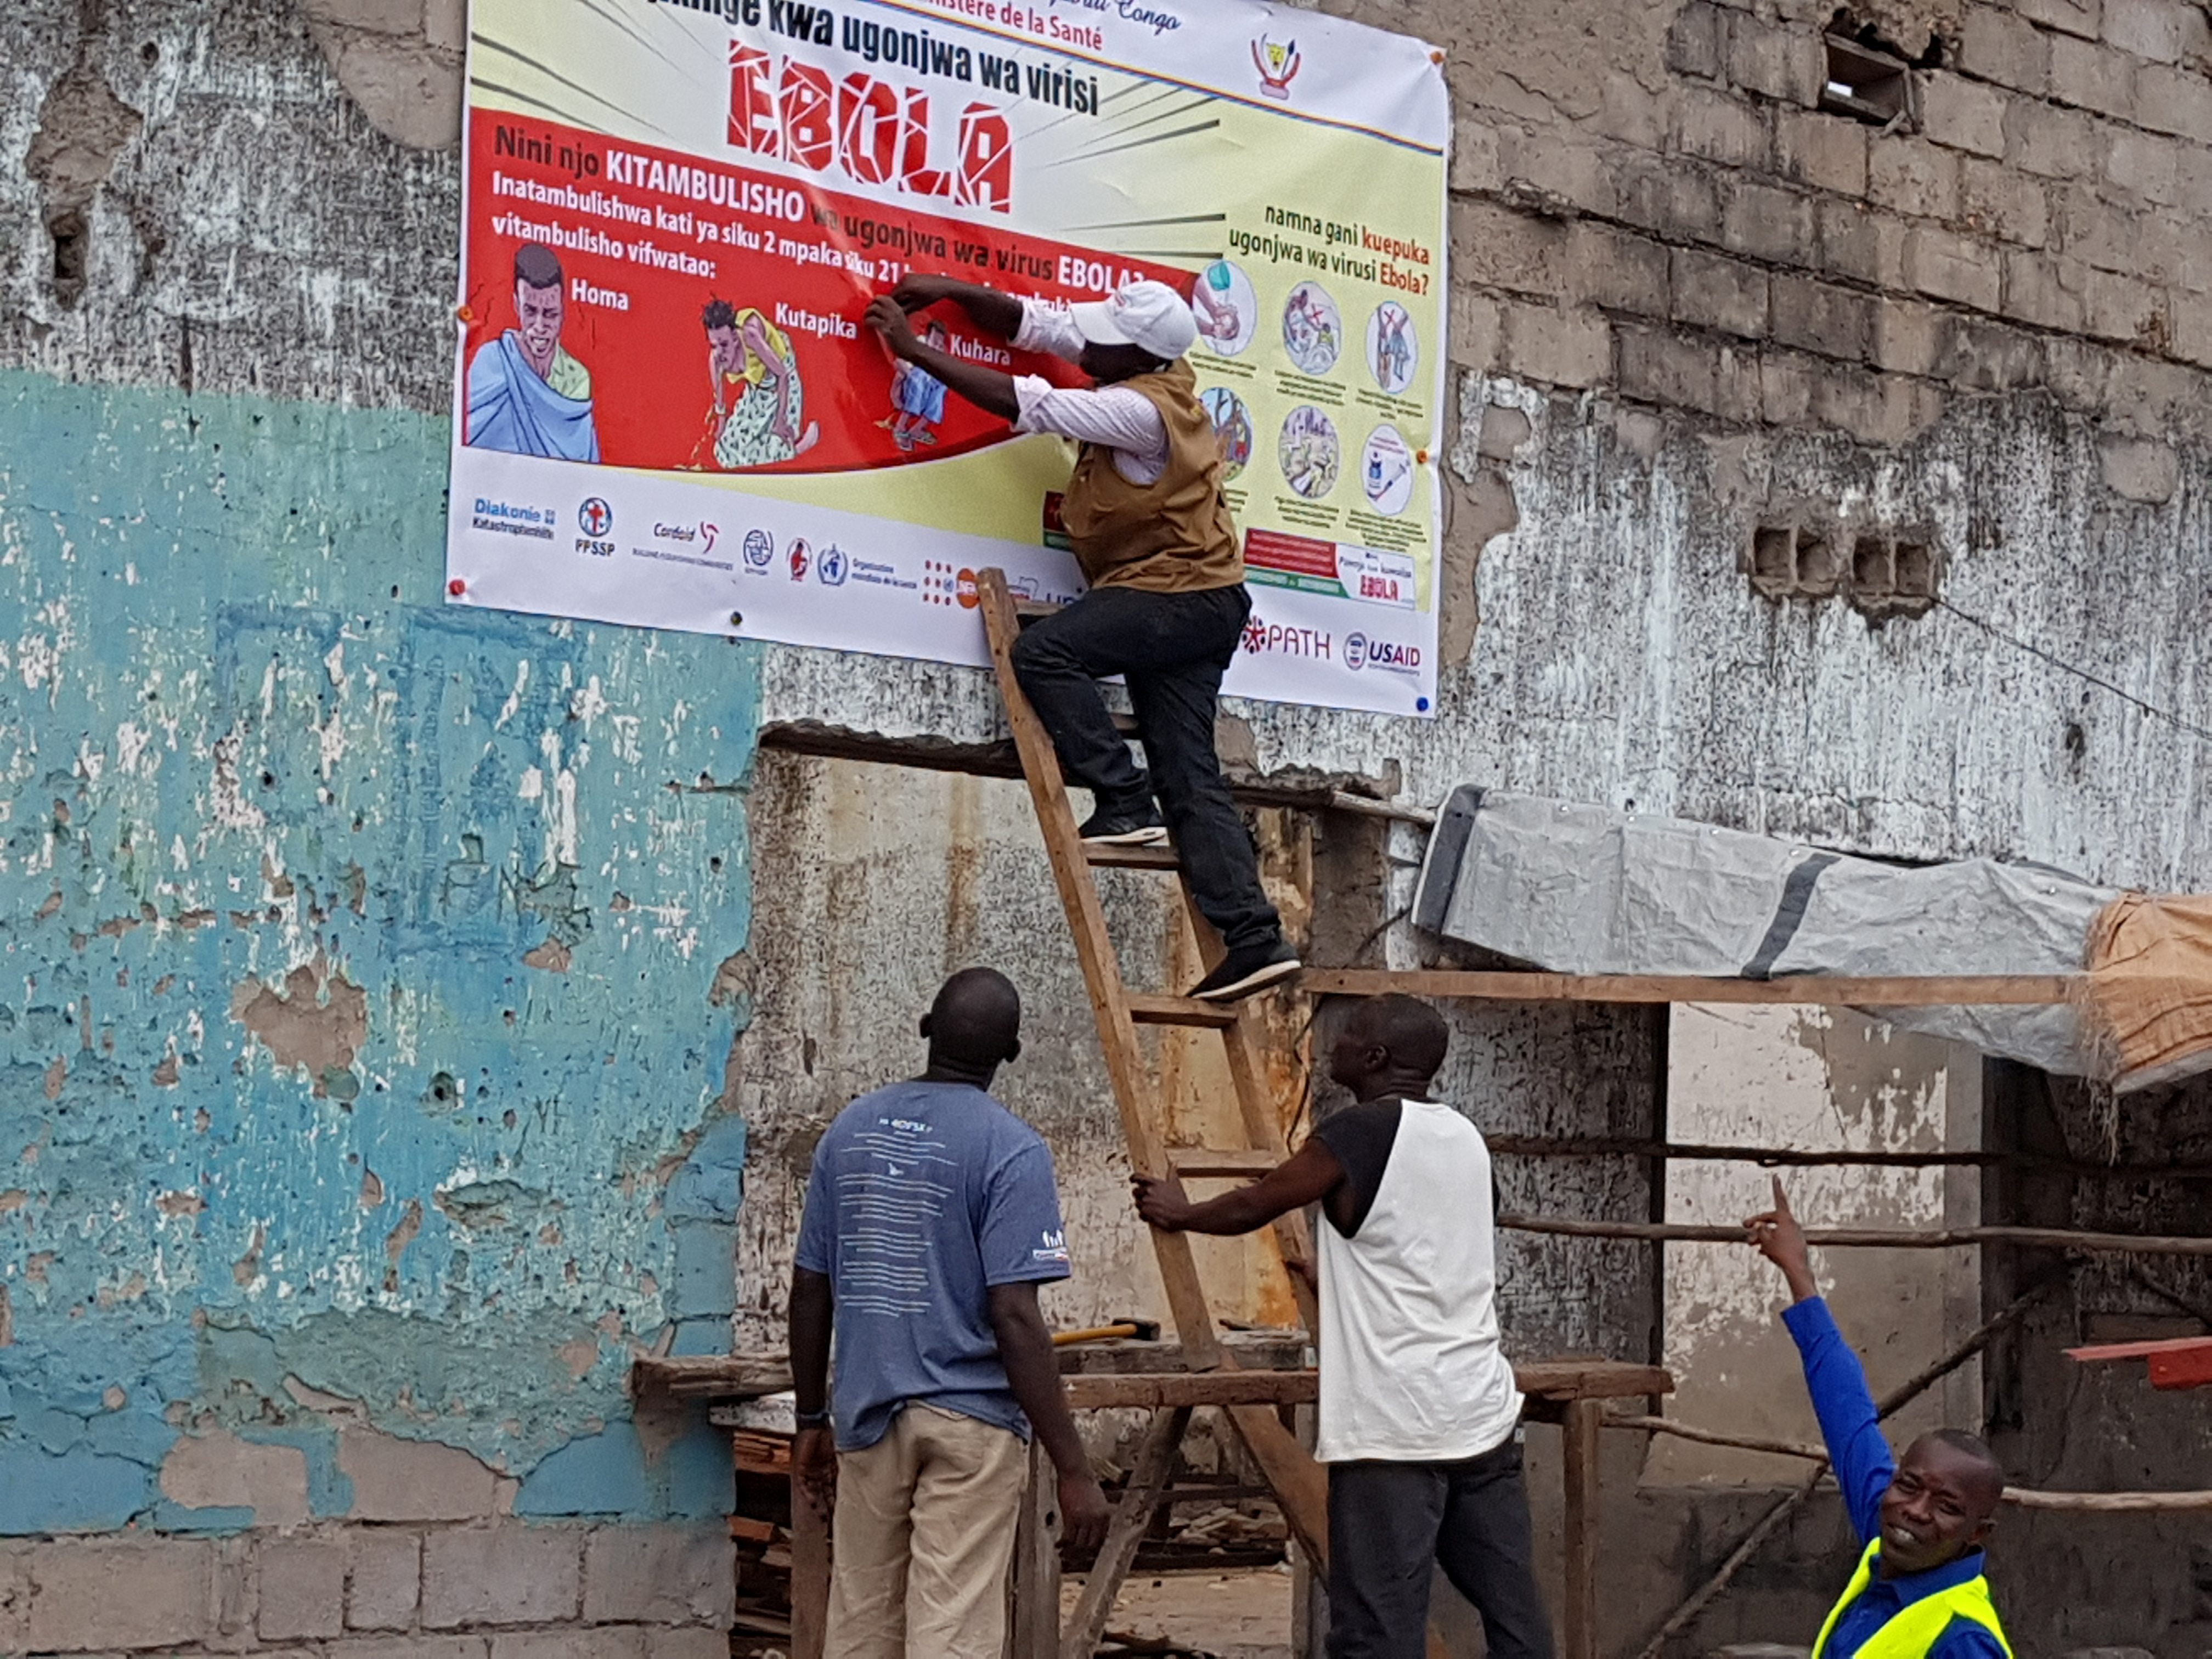 Workers fix an Ebola awareness poster in Tchomia, Congo, to raise awareness about Ebola in the local community